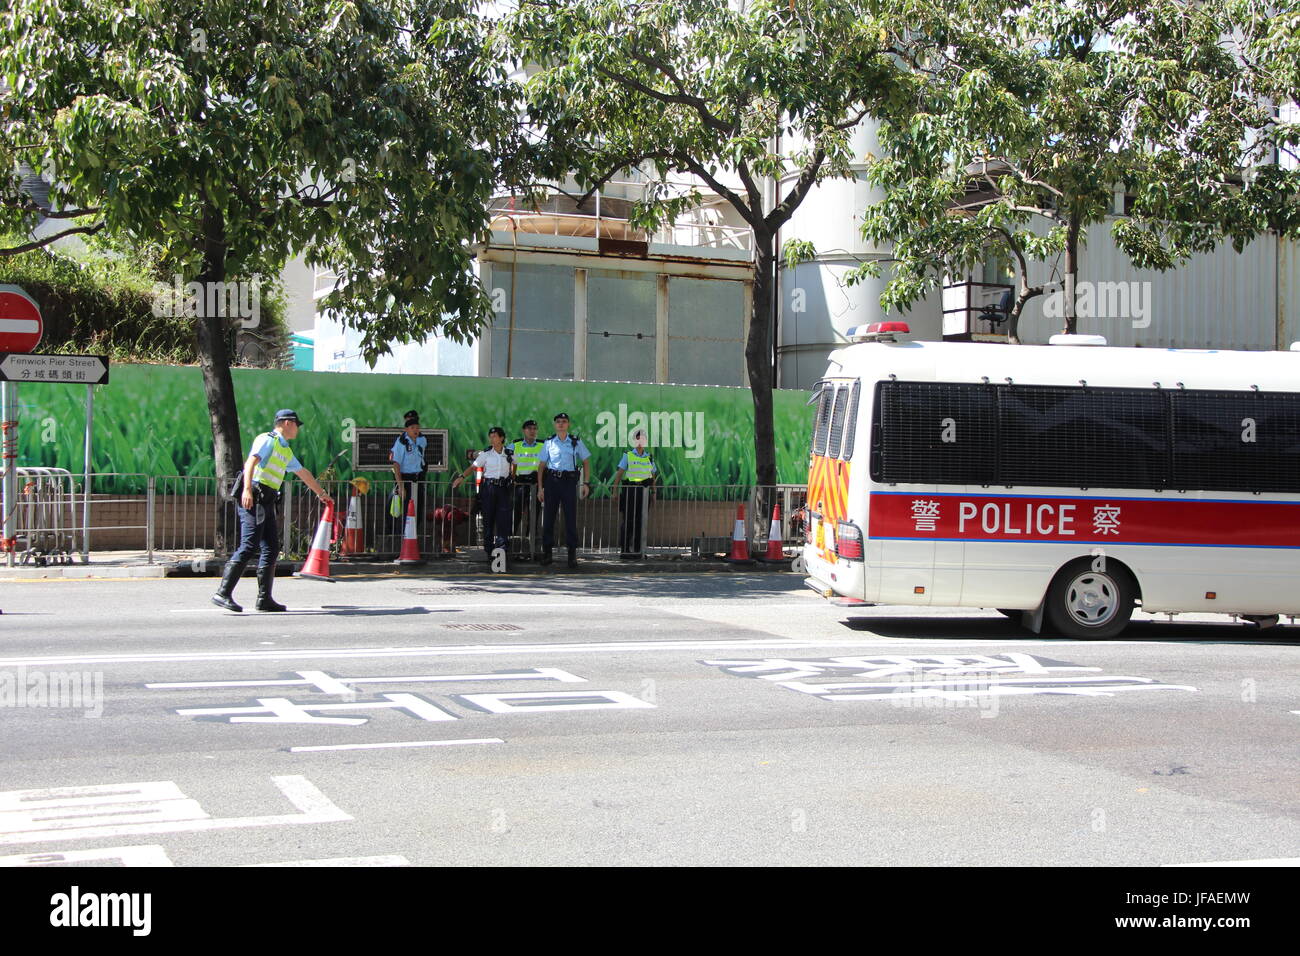 Fenwick Pier Street of Hong Kong was subject to traffic control by the police on the first day of Xi Jinping's visit to Hong Kong. Stock Photo